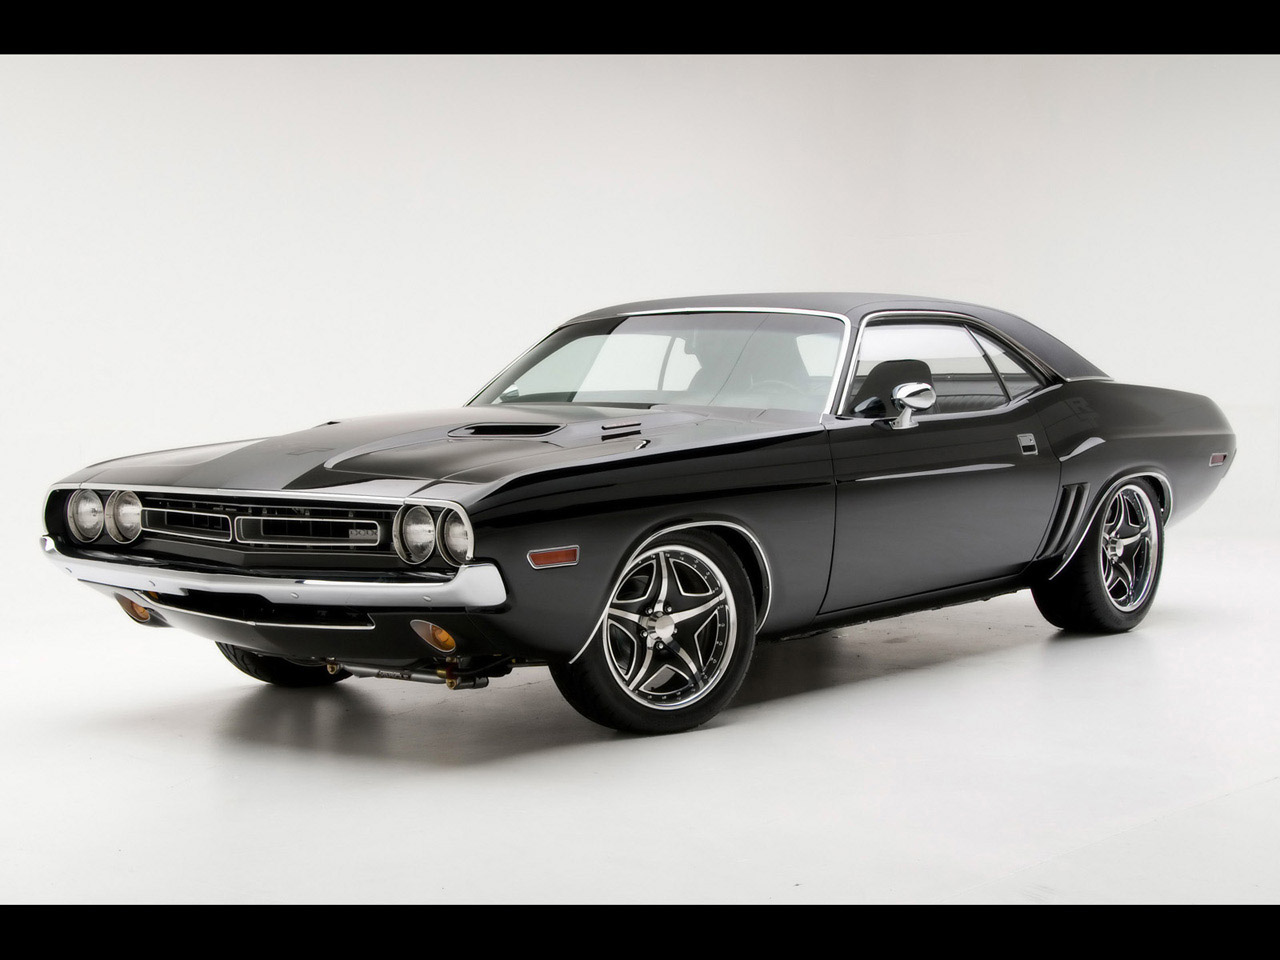 Hd Cool Car Wallpapers cool muscle car wallpapers 1280x960